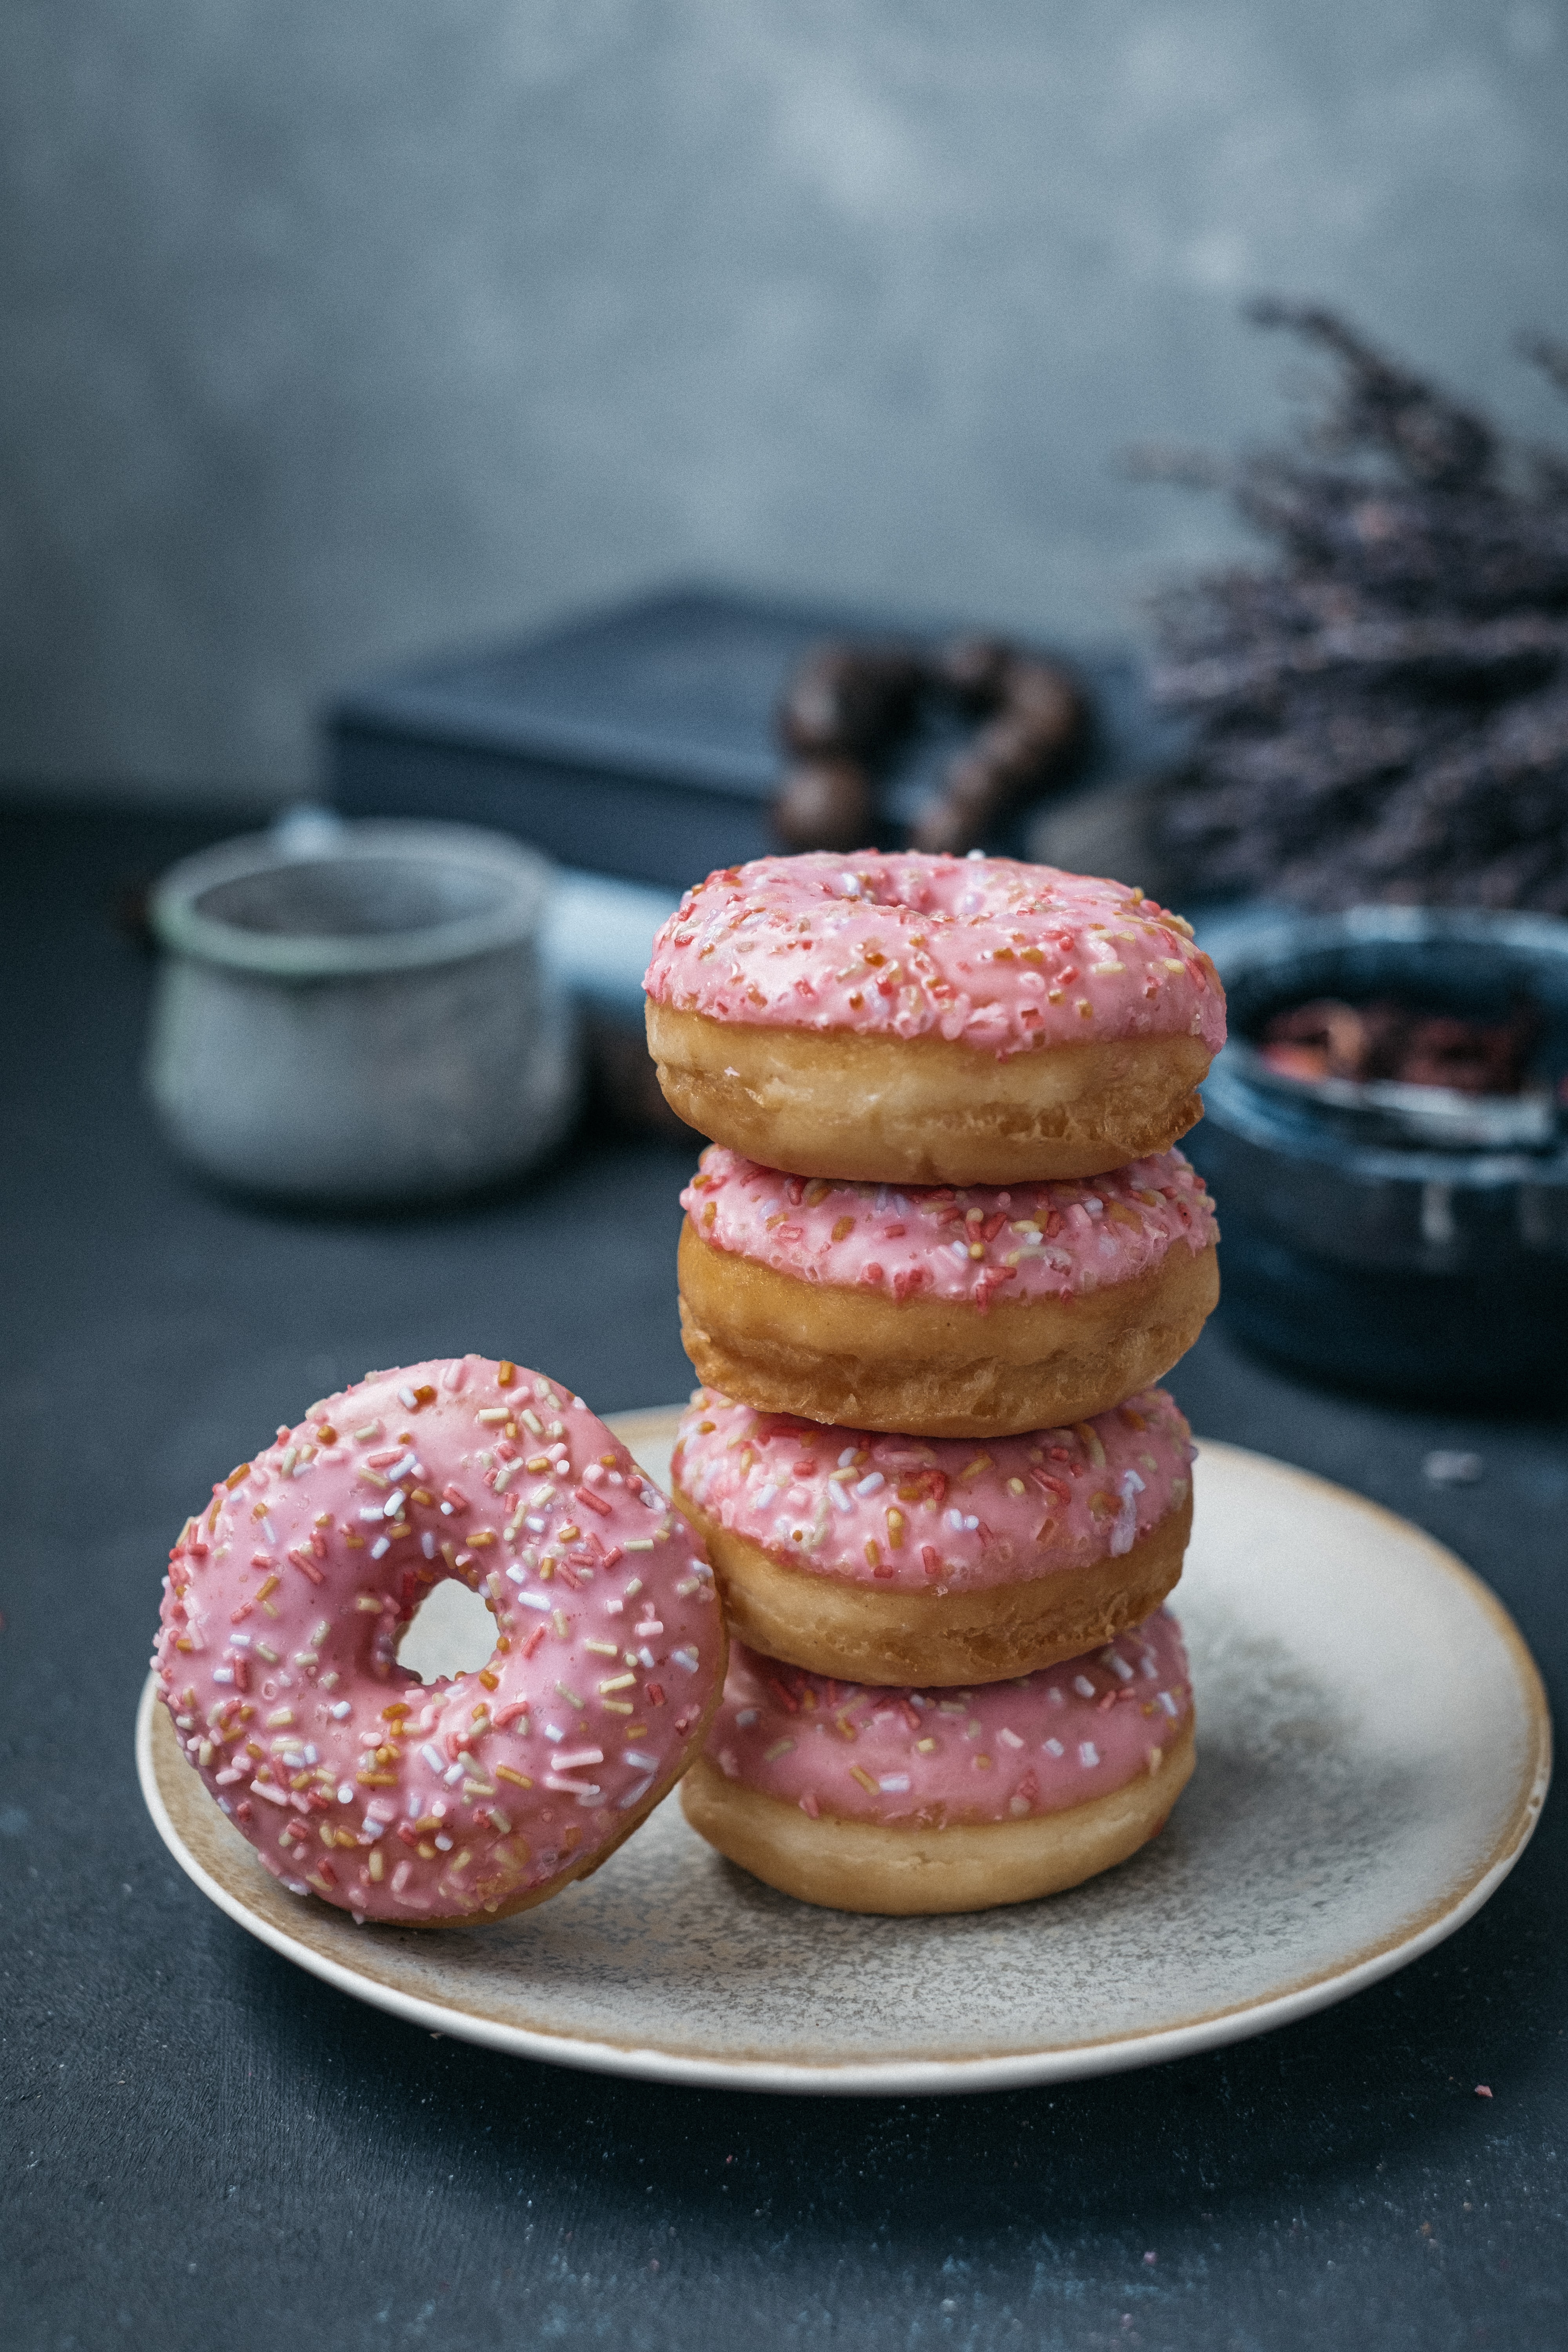 55687 Screensavers and Wallpapers Glaze for phone. Download food, still life, glaze, donut, doughnut pictures for free